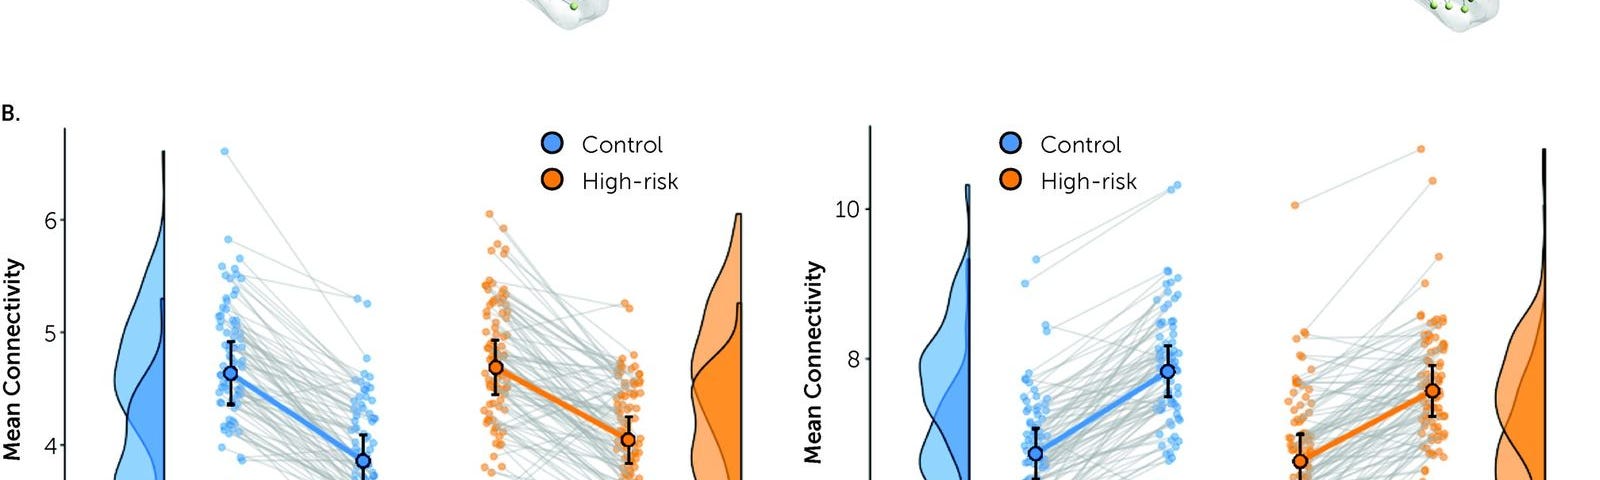 Longitudinal changes in structural connectivity in the brain across both high-risk and control groups.